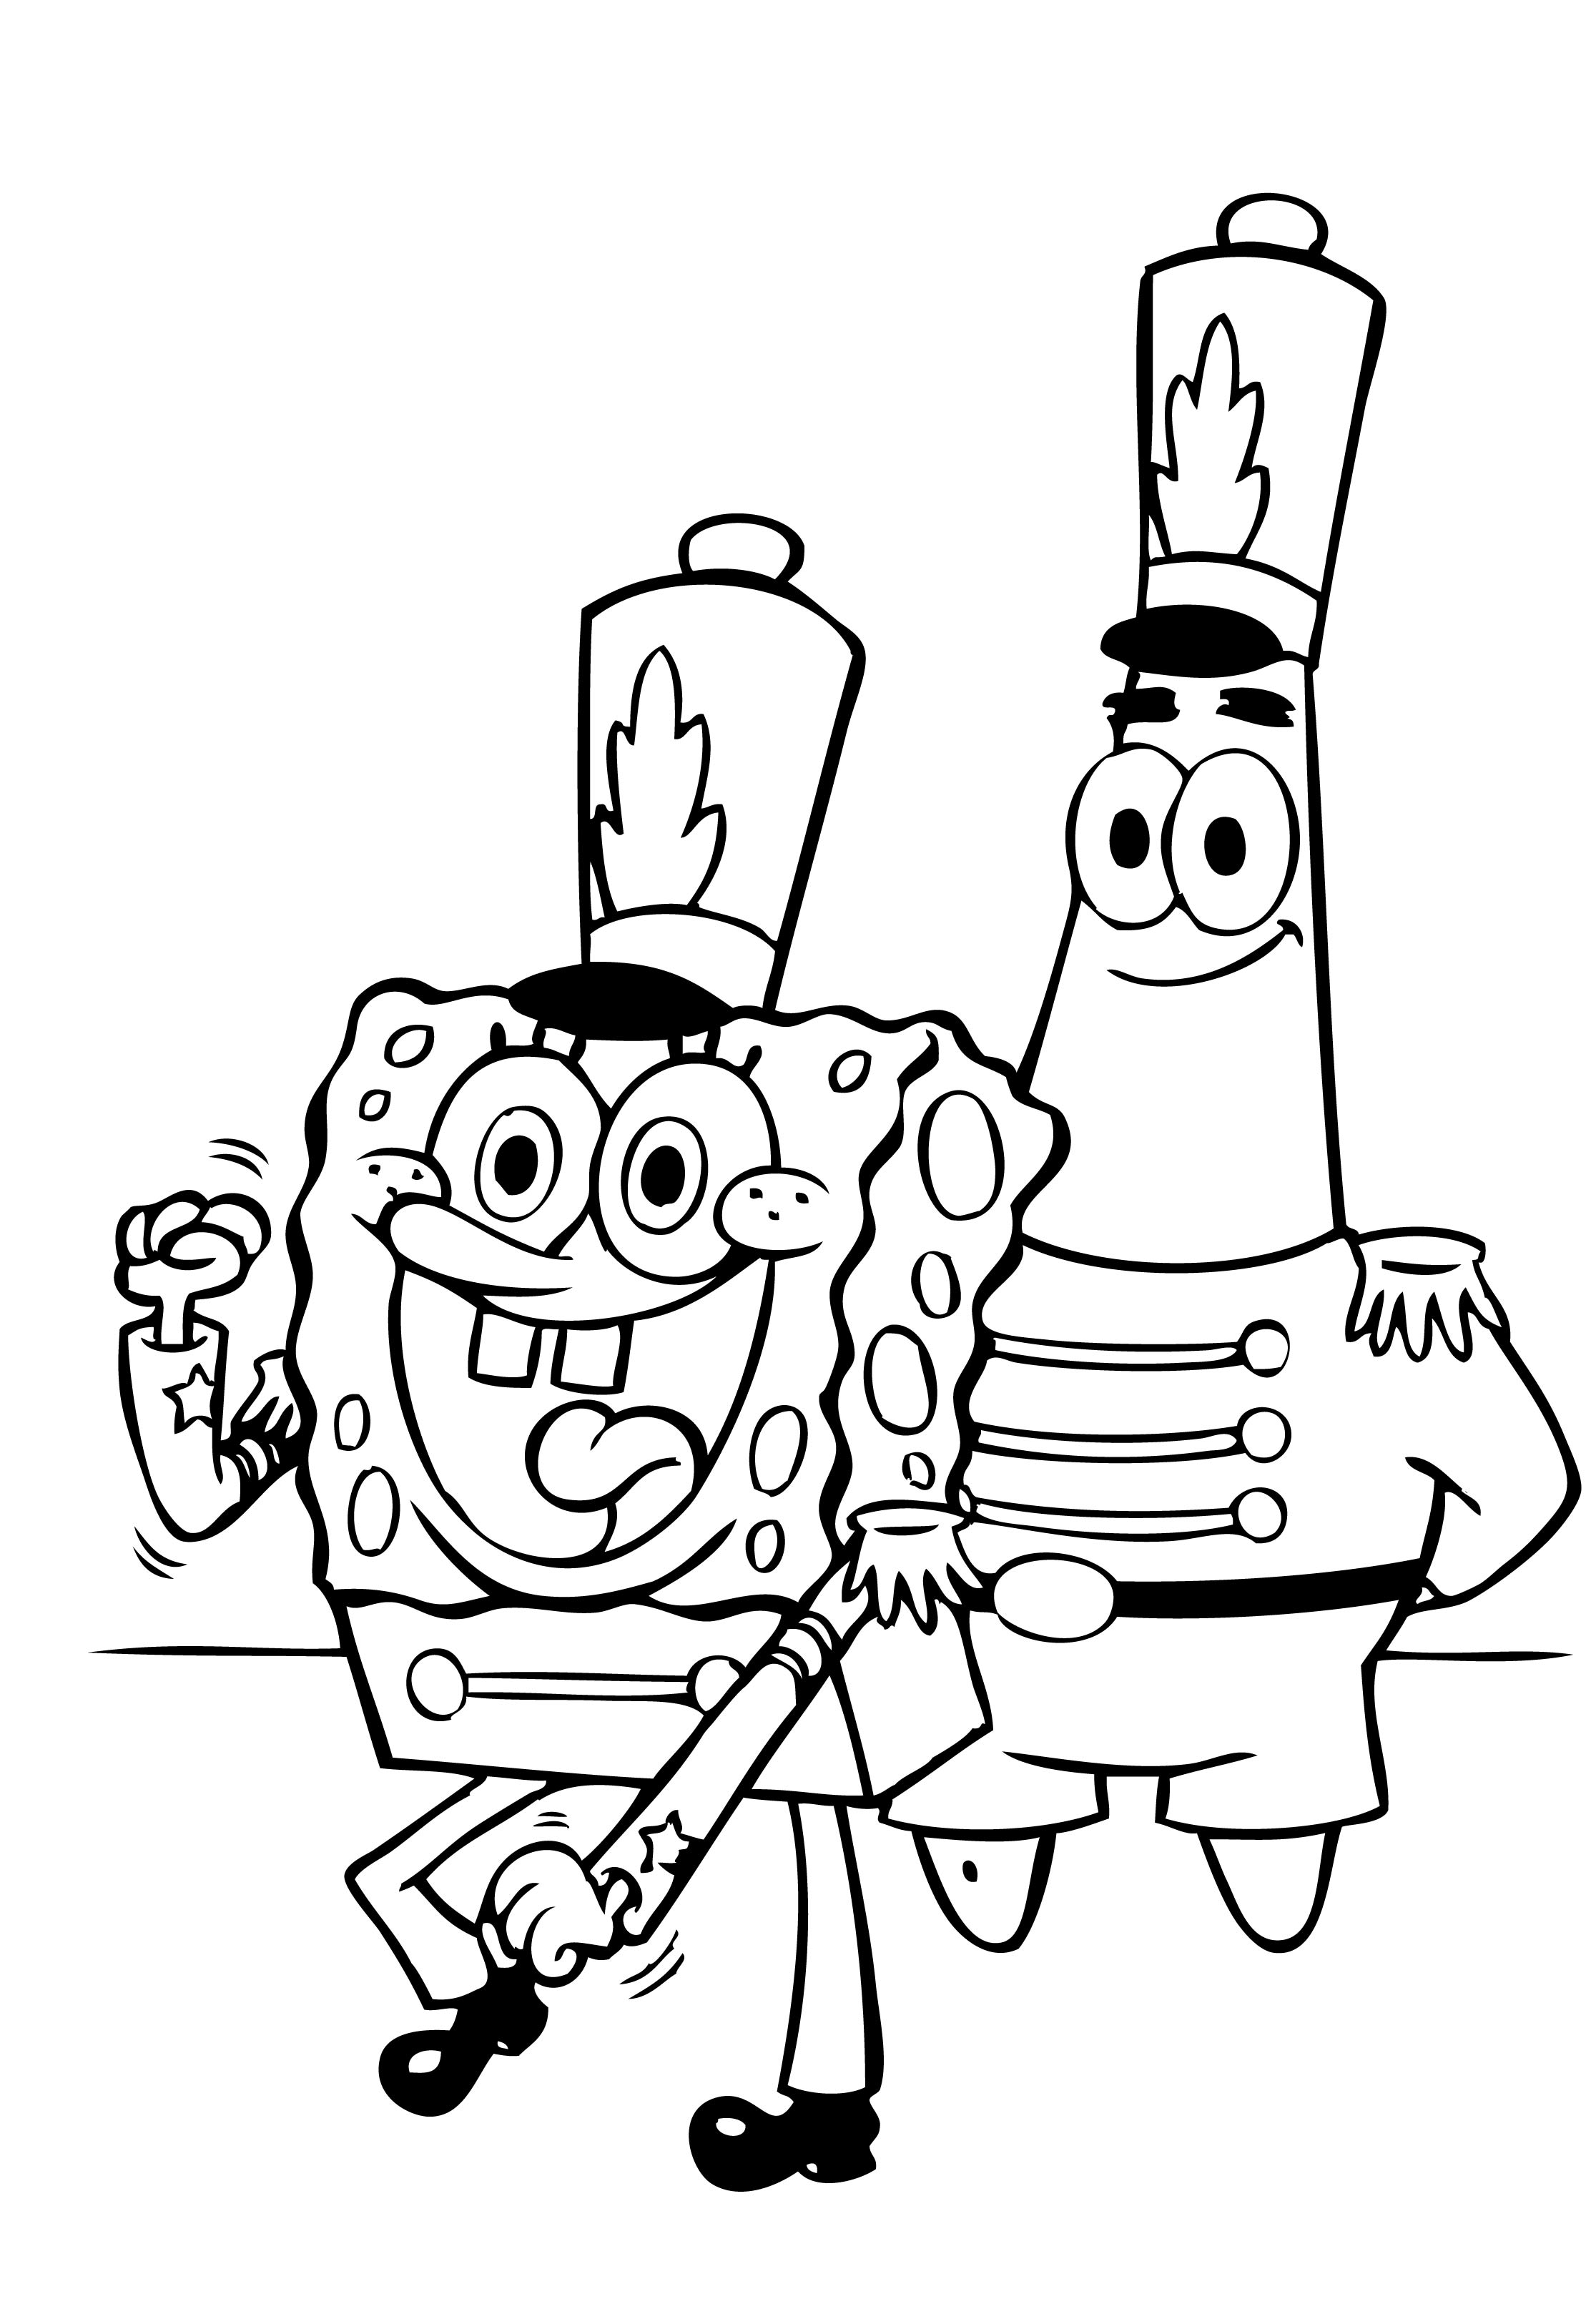 Spongebob Coloring Pages | Free download on ClipArtMag